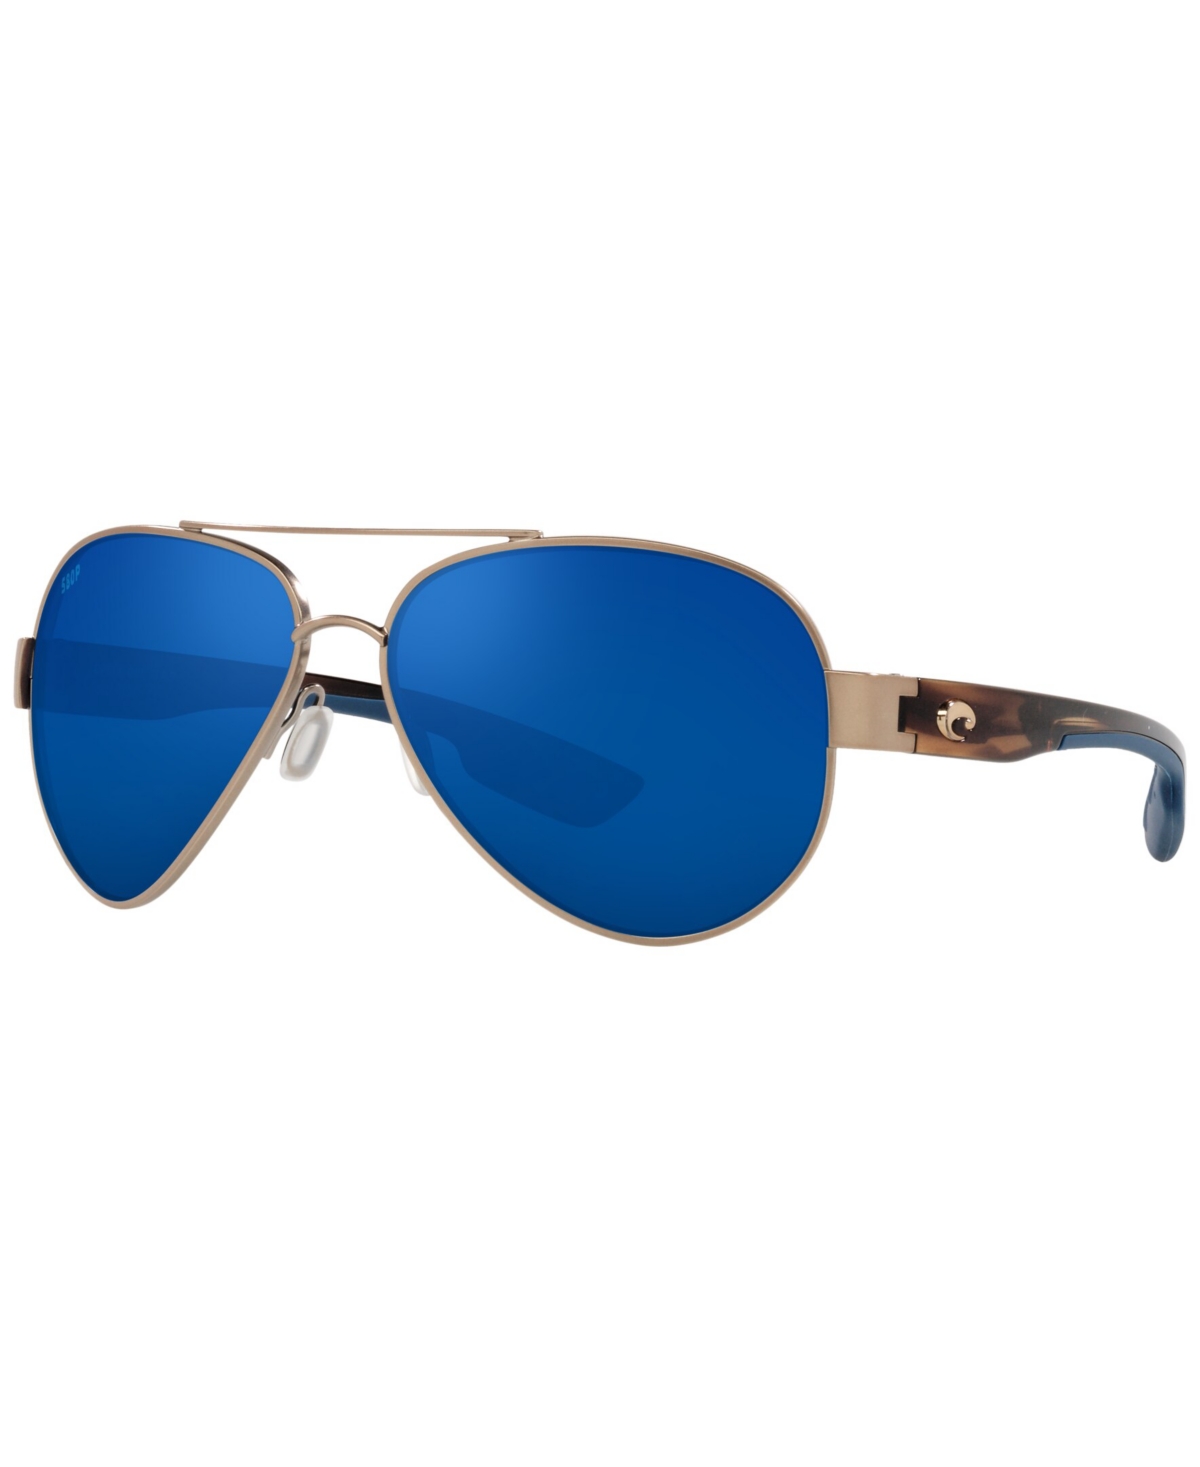 Unisex Polarized Sunglasses, South Point - Golden Pearl/Blue Mirror